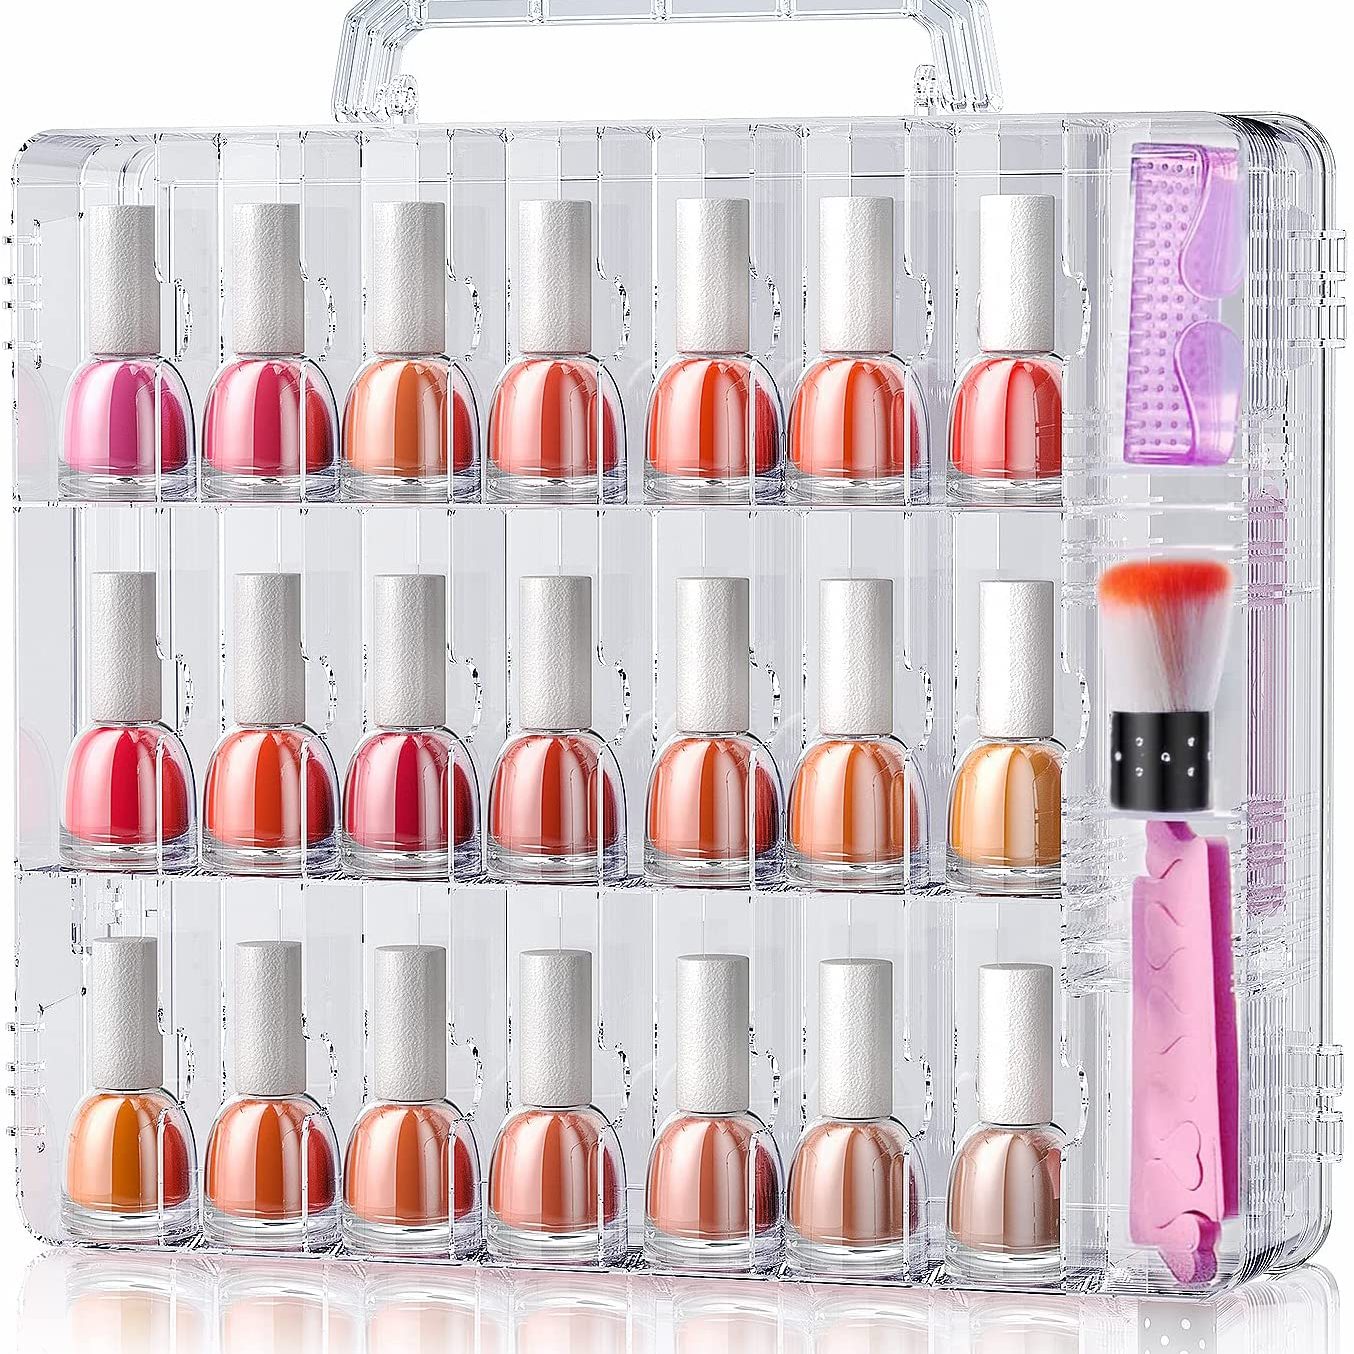 Amazon.com : OSPUORT Portable Nail Polish Carrying Case, Holds 30 Bottles,  Double Layer Design Nail Polish Holder, Professional Travel Organizer Bag  for Nail Varnish and Manicure Set (Leaf) : Beauty & Personal Care